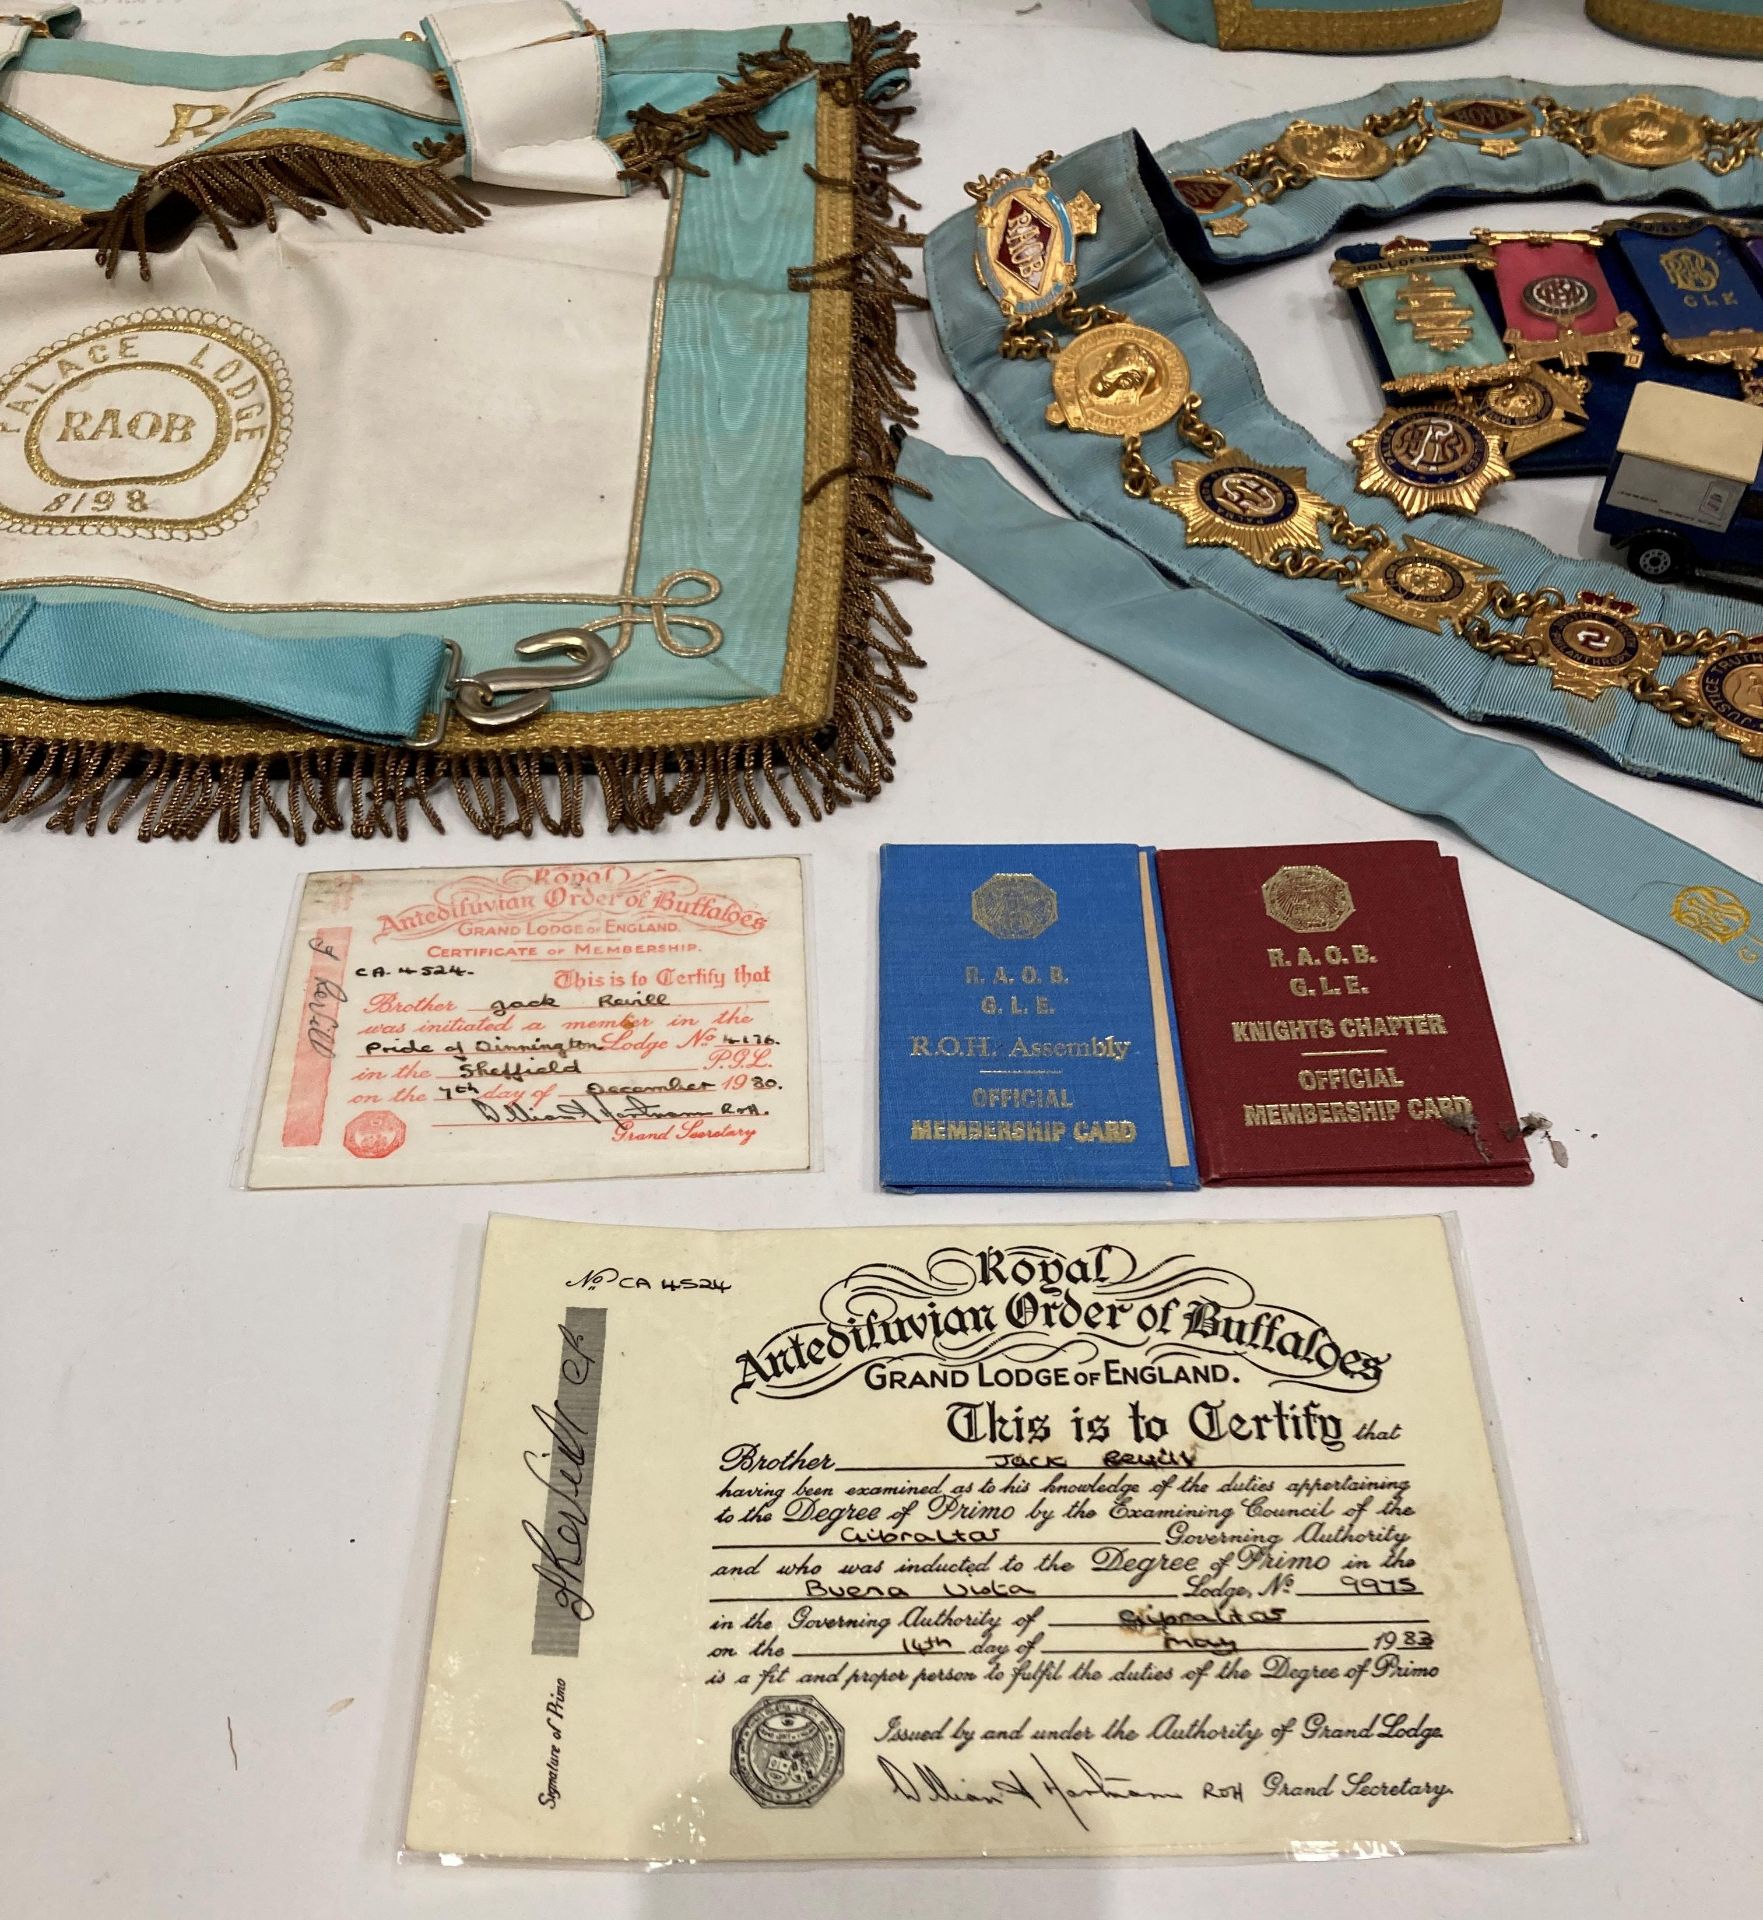 Contents to box - RAOB ceremonial sash with medals, cuffs, gloves, certificates, - Image 3 of 5